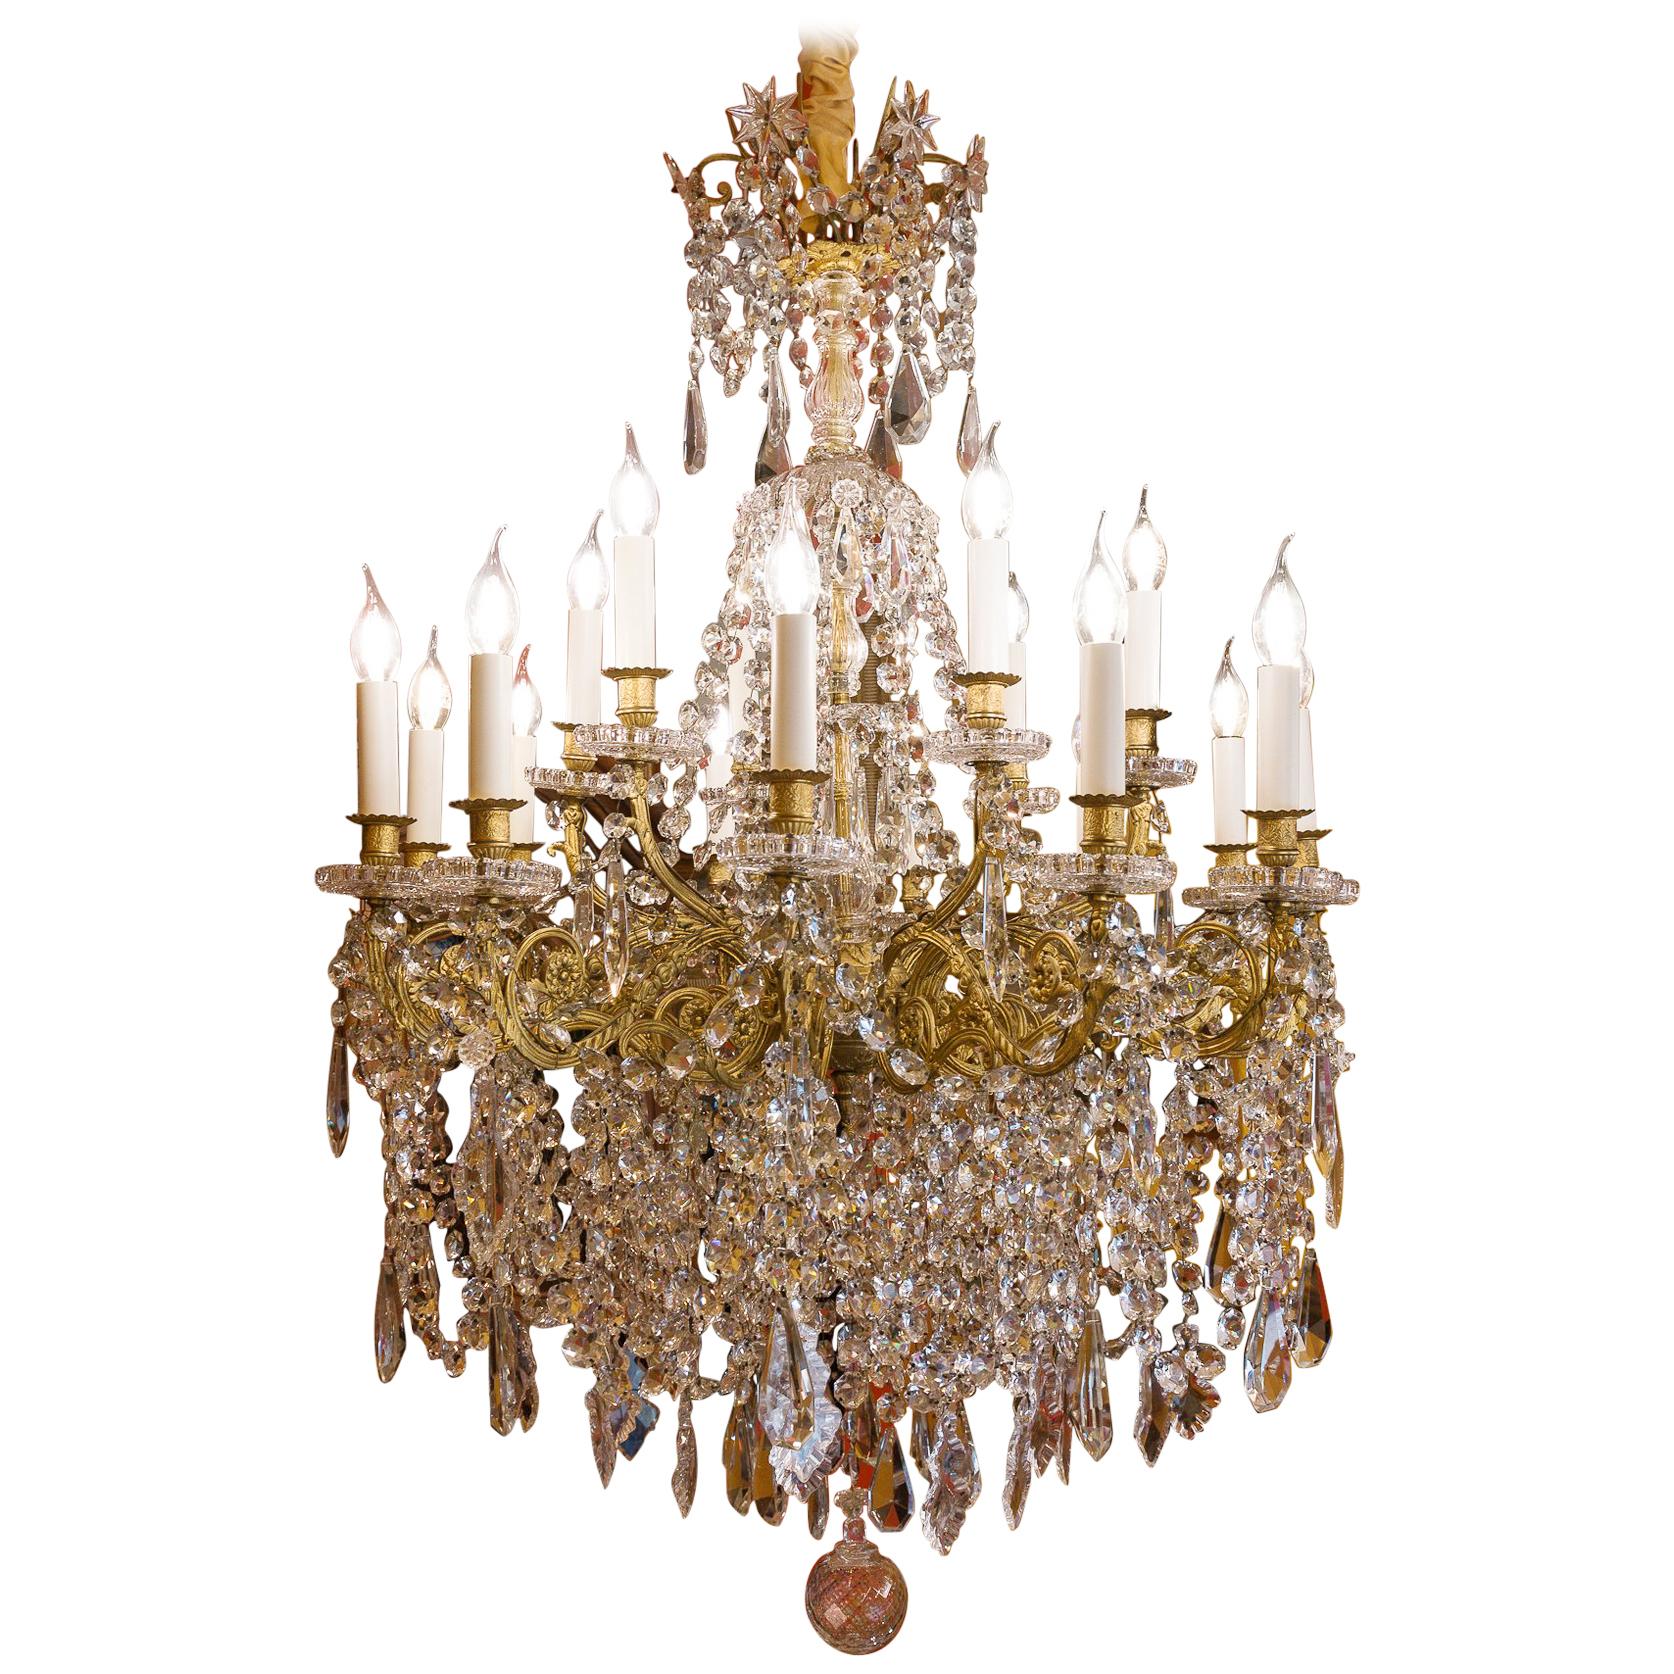 Late-19th Century Gilt-Bronze and Cut-Crystal Large Chandelier Sign by Baccarat